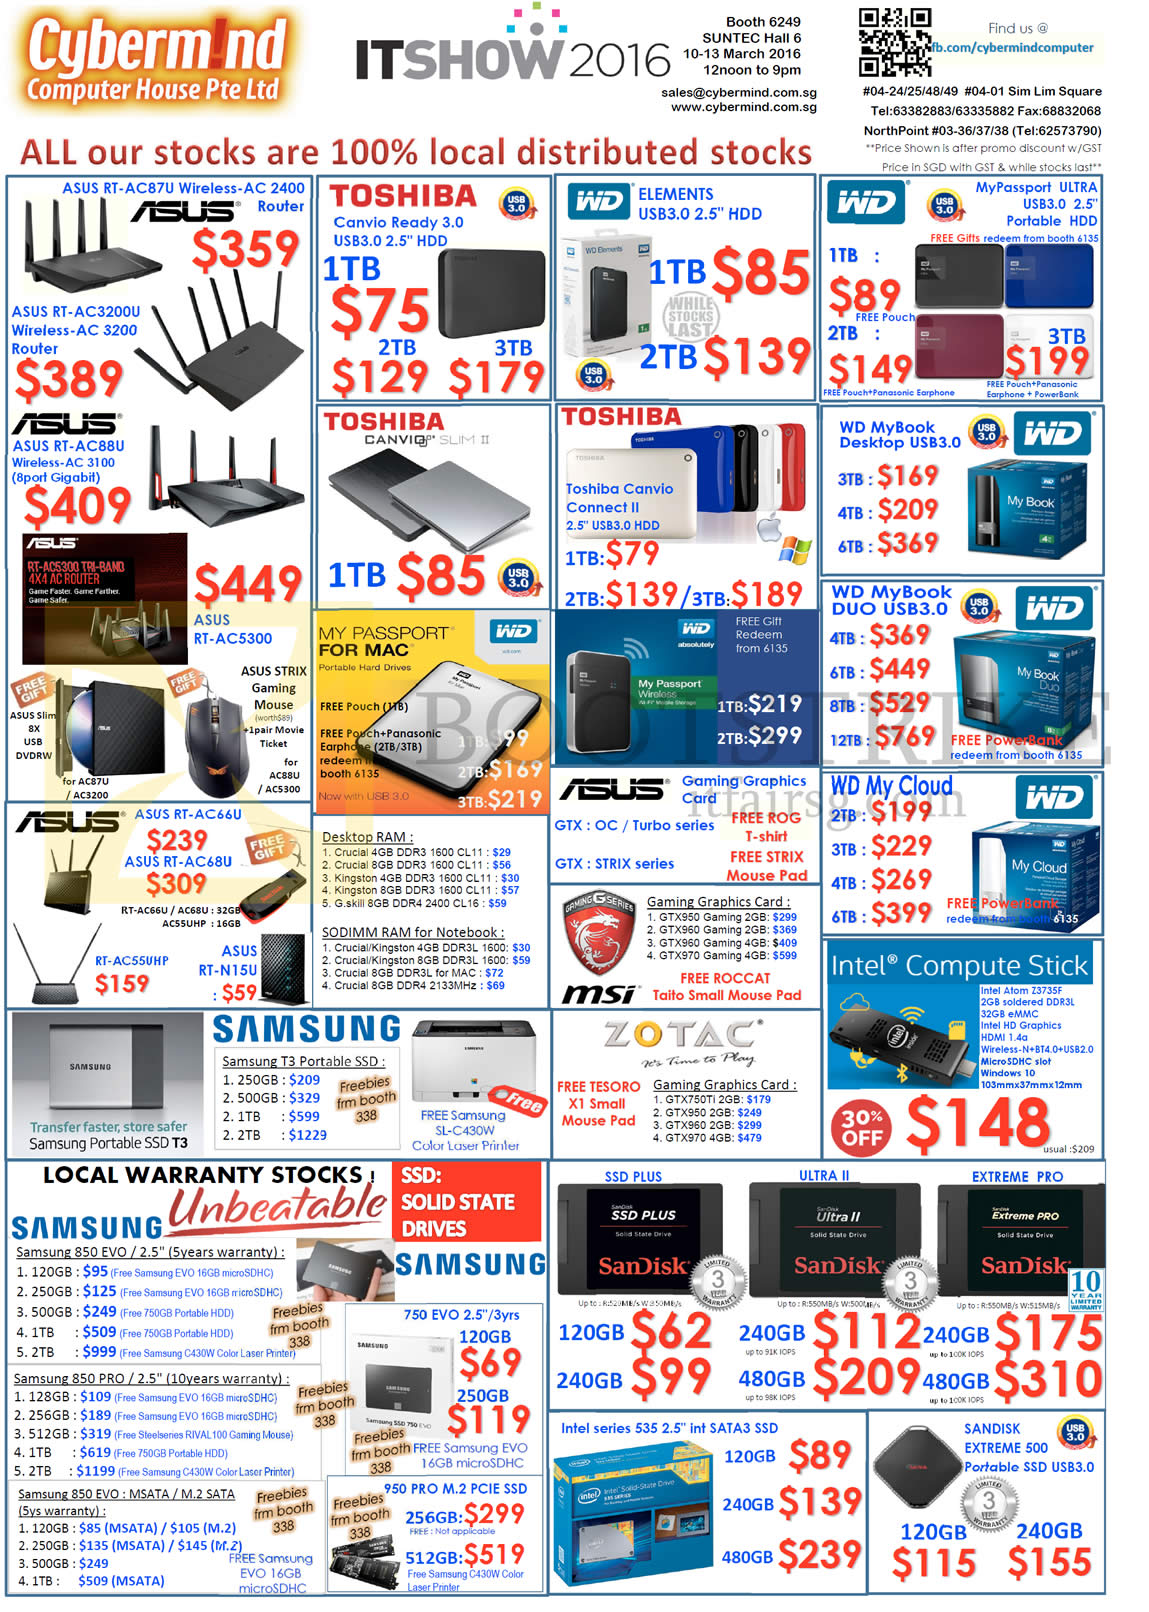 IT SHOW 2016 price list image brochure of Cybermind Routers, External Storage, Hard Disk Drives, SSDs, Asus, Toshiba, Western Digital, MSI, Zotac